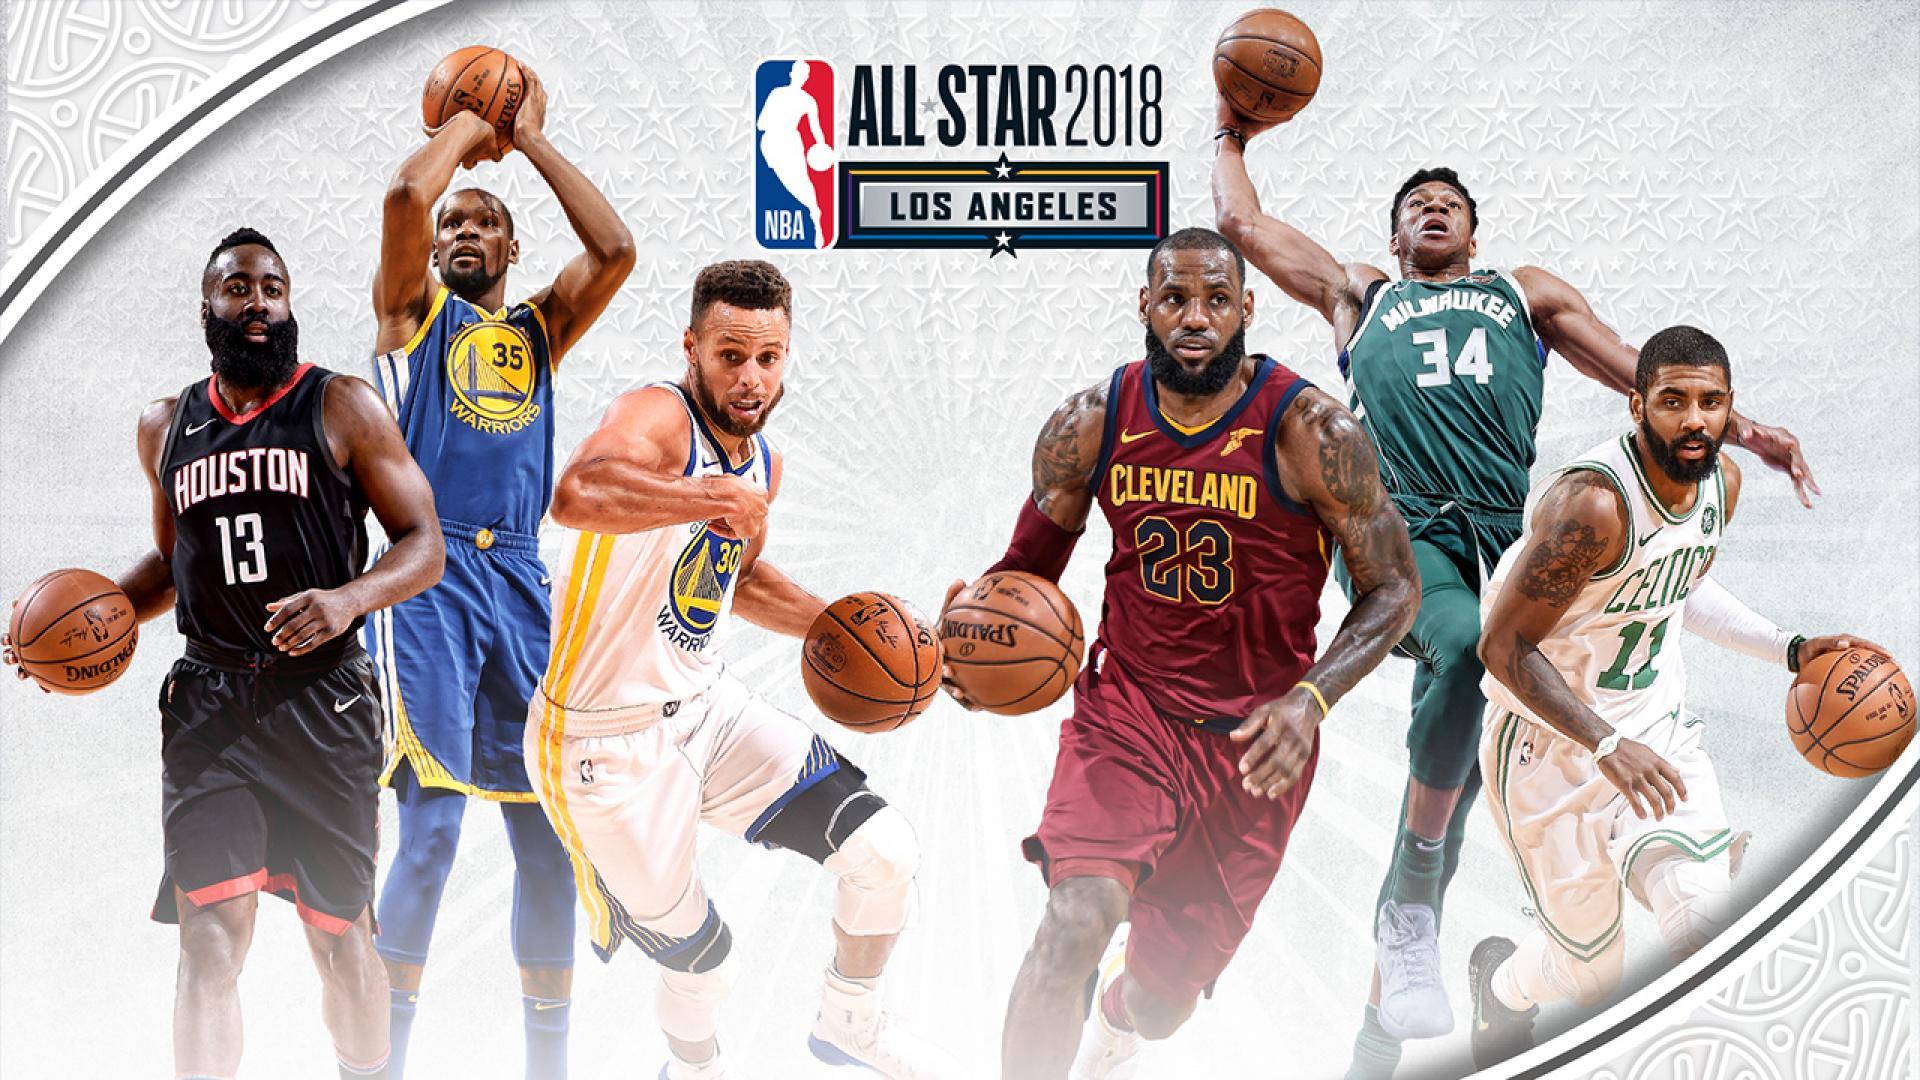 All Star Game 2018 LeBron vs Curry